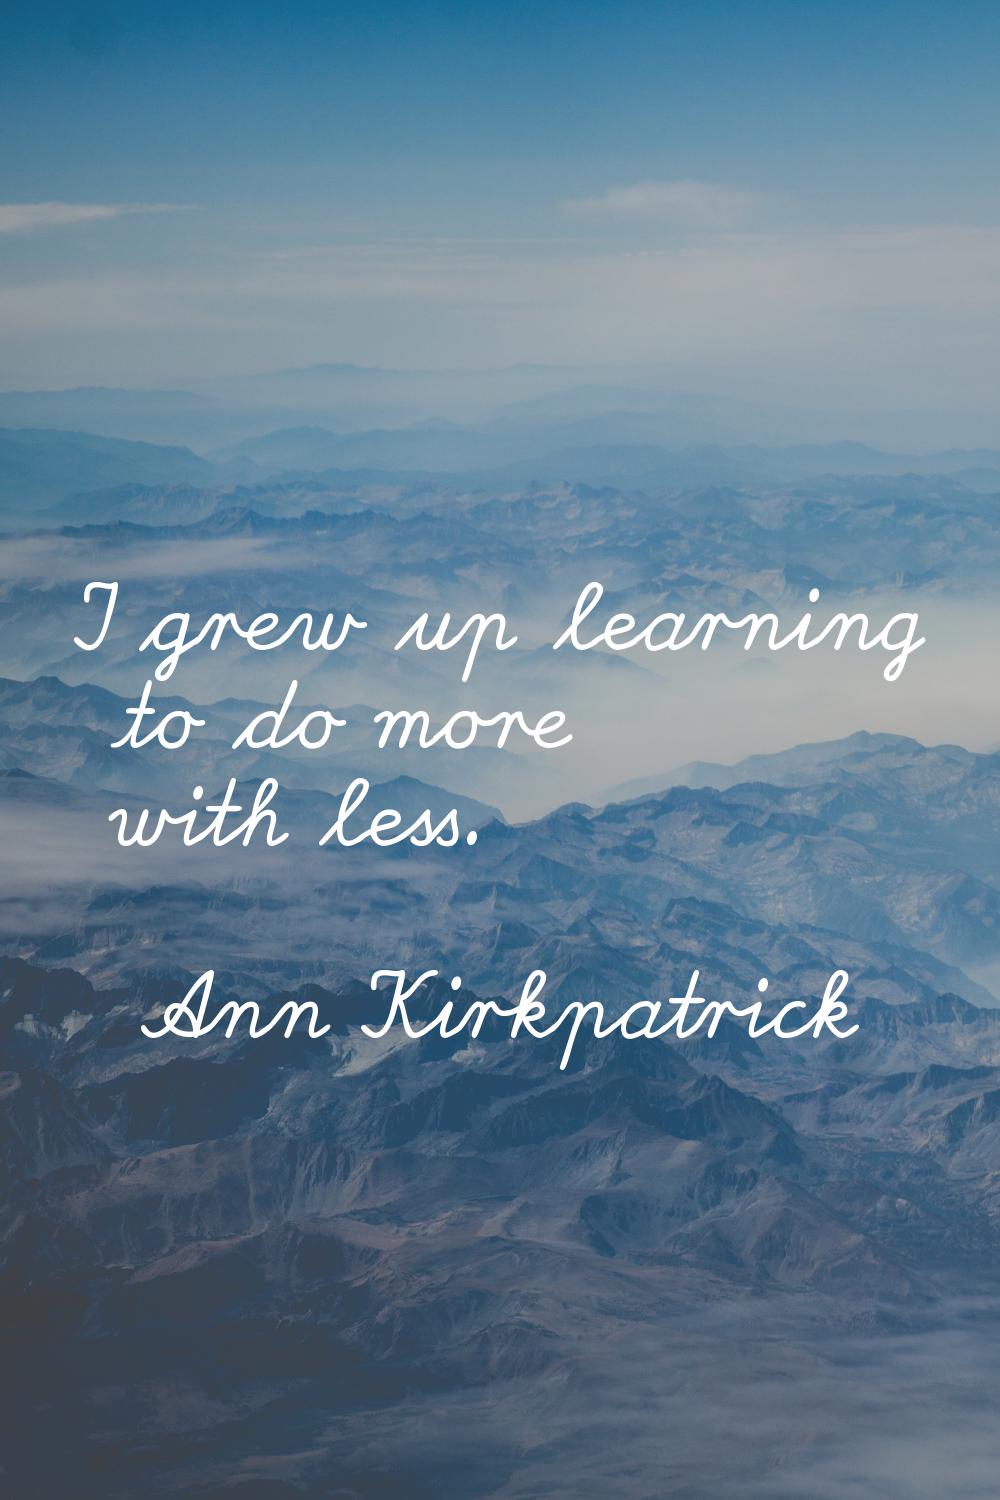 I grew up learning to do more with less.